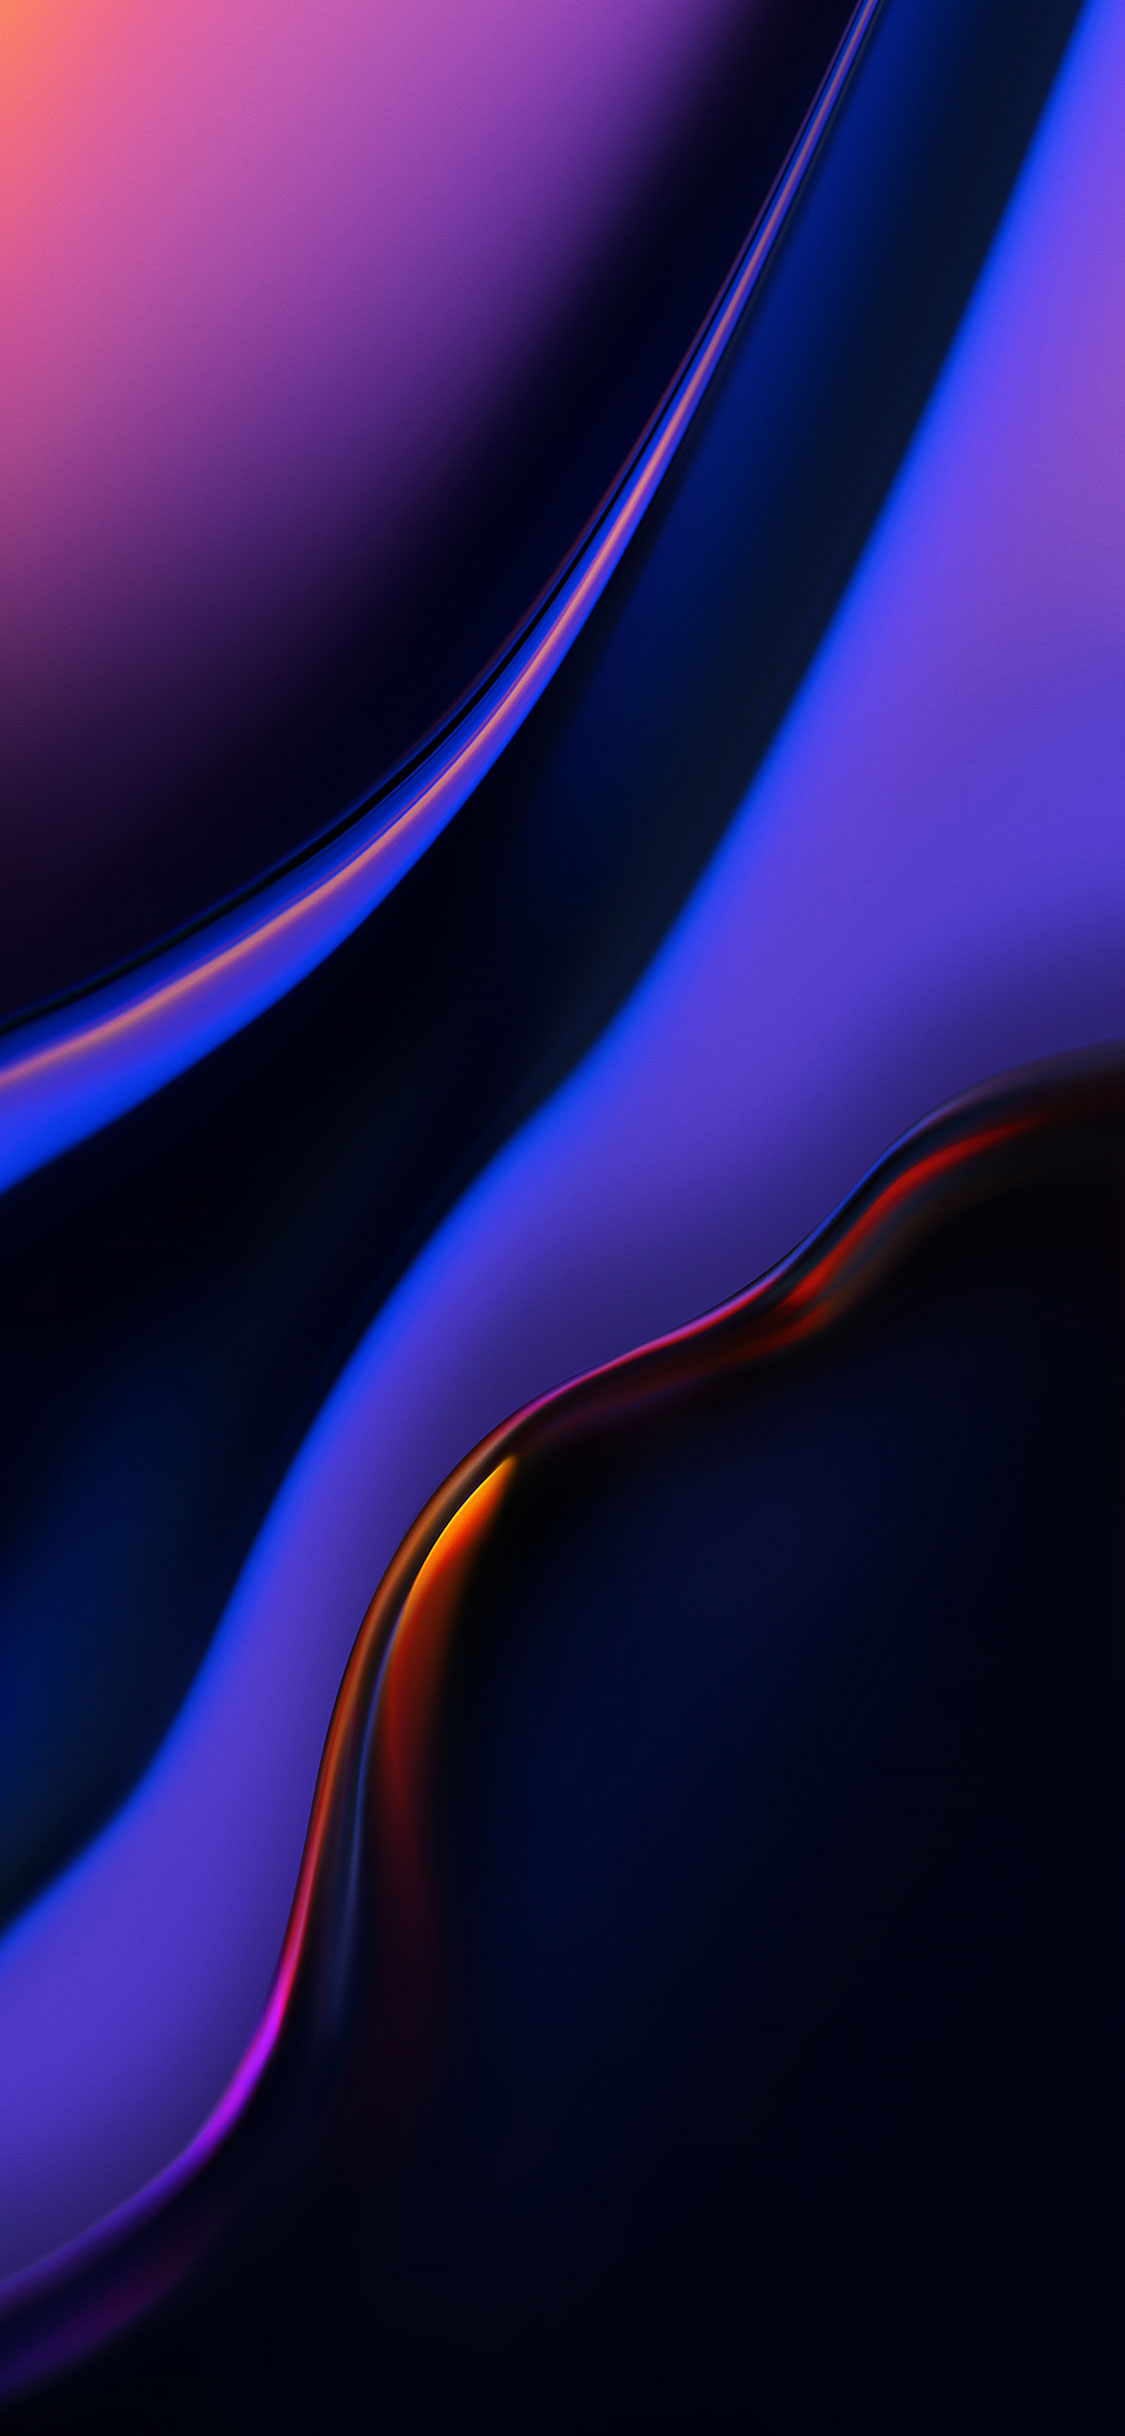 60 Latest Best Iphone X Wallpapers Backgrounds For Everyone